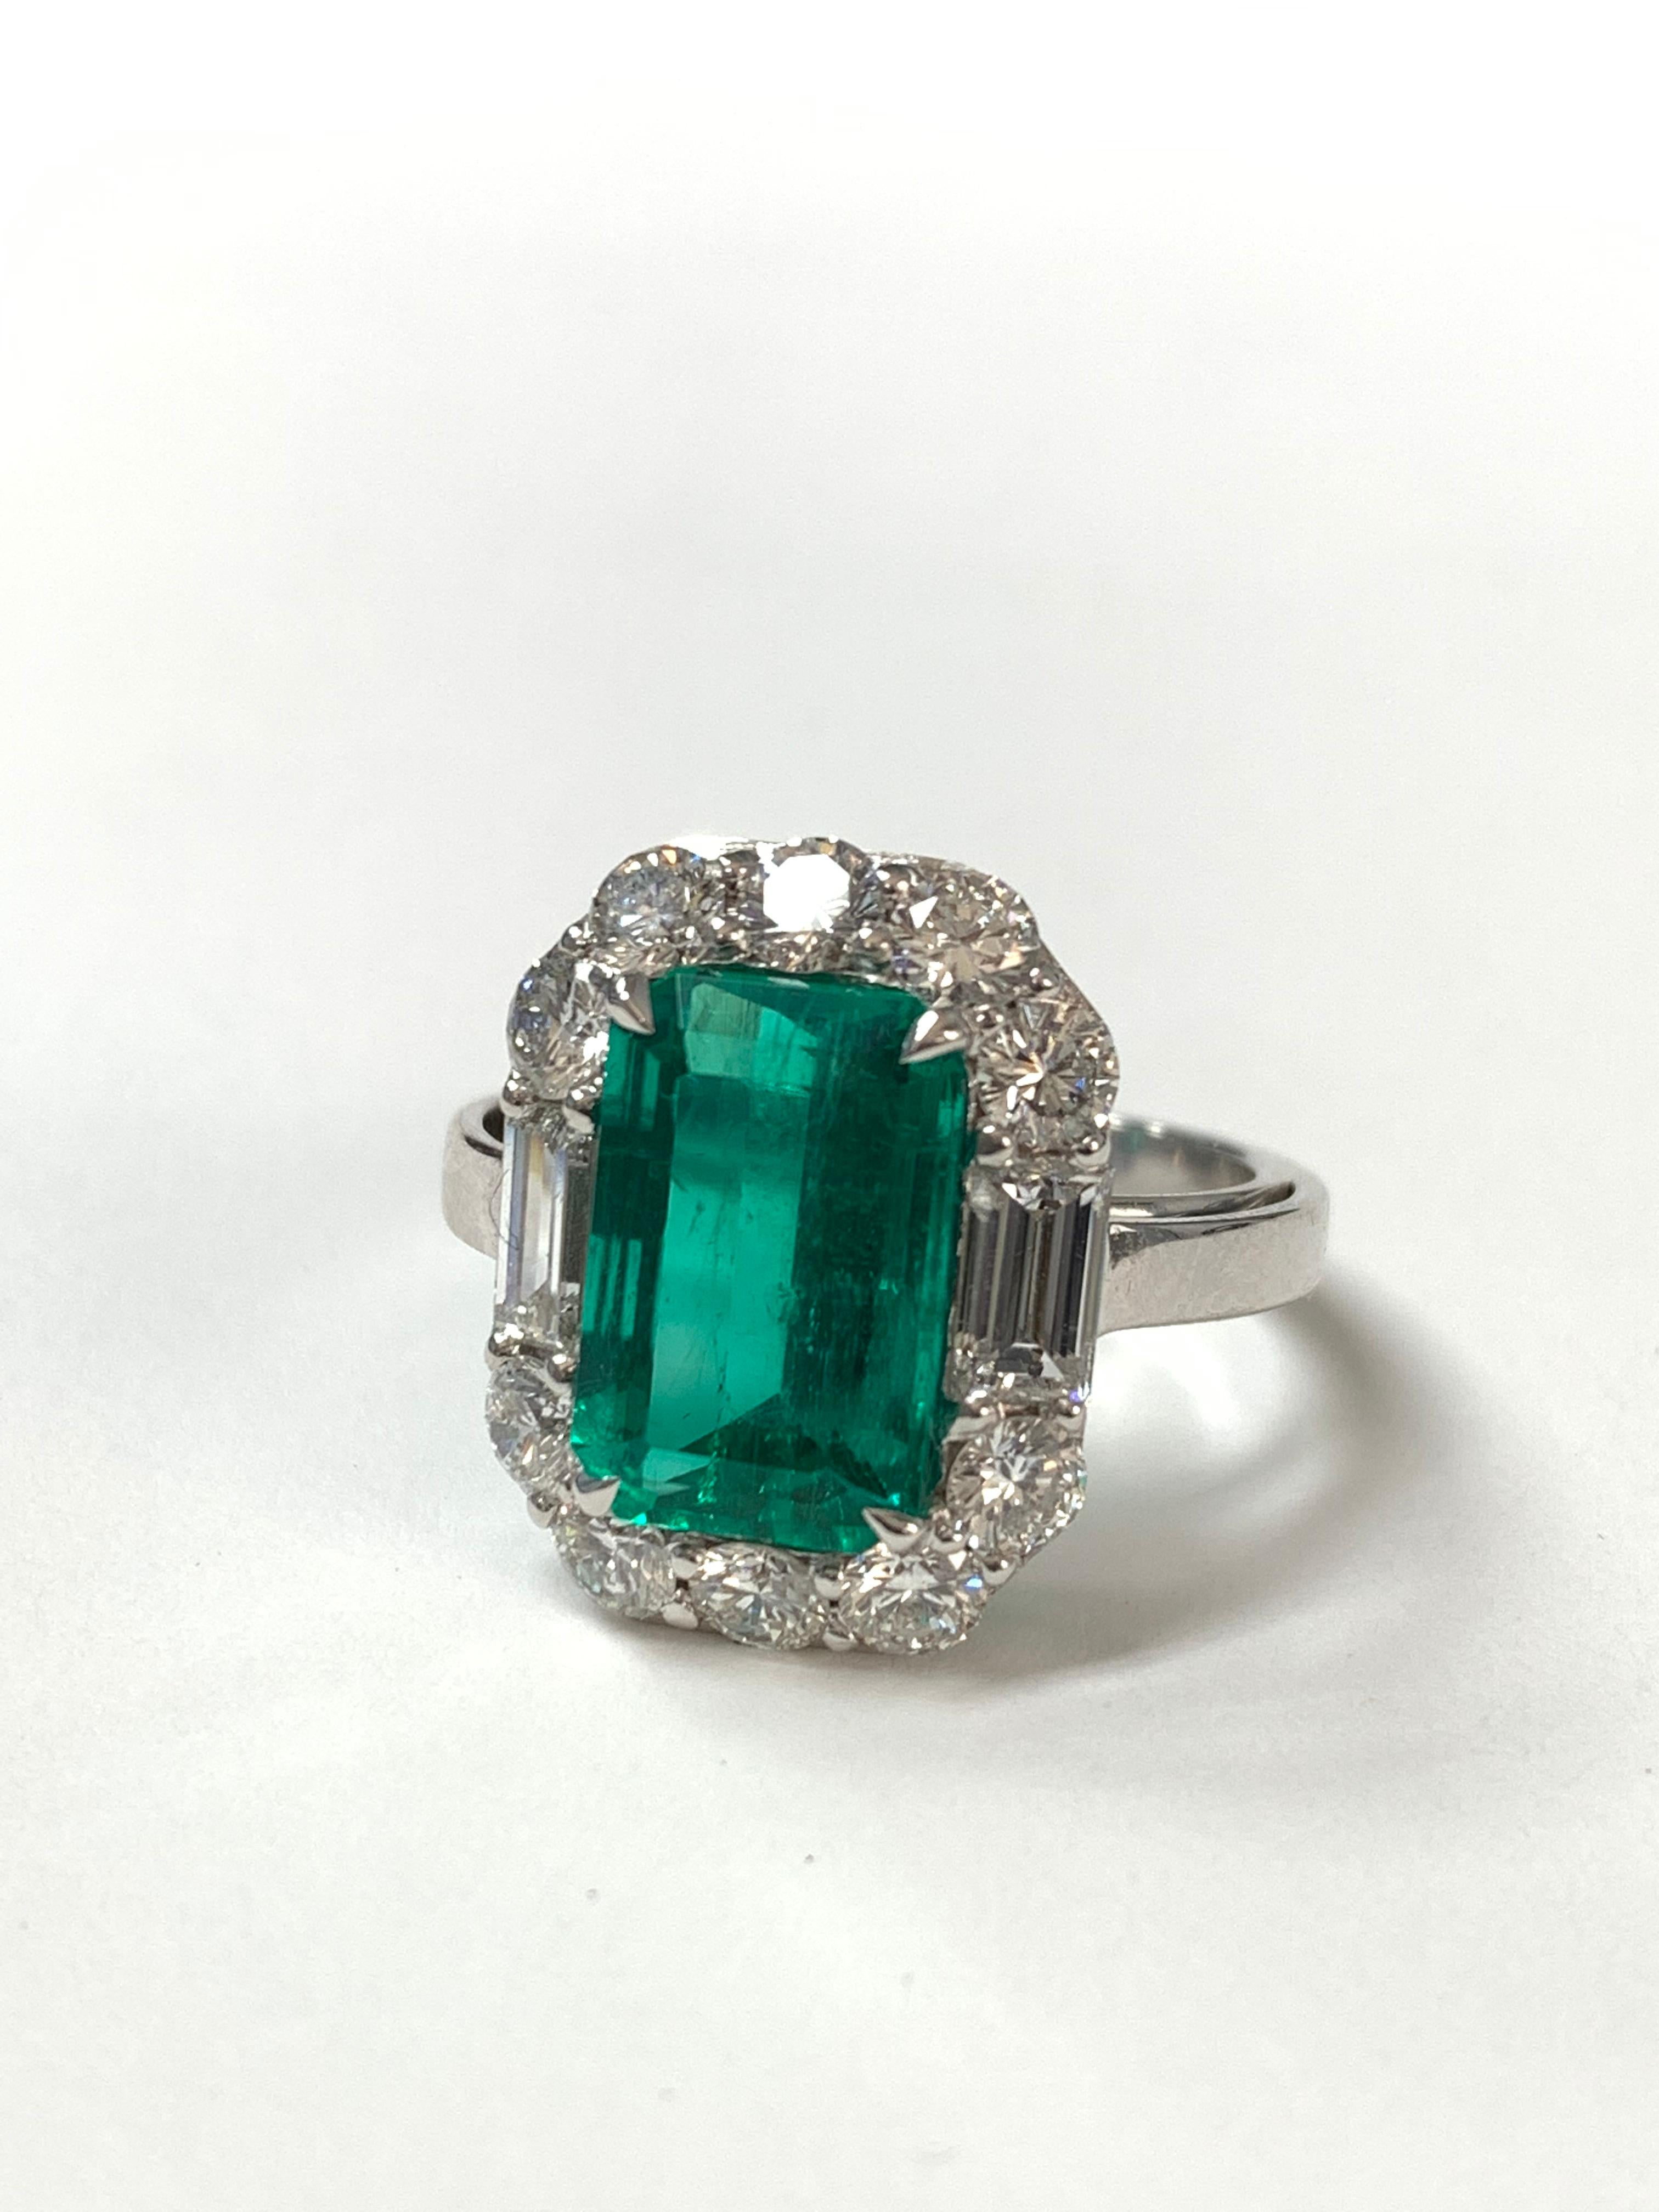 GIA Certified 3.63 Carat Colombian Emerald and Diamond Ring in 18k White Gold 3